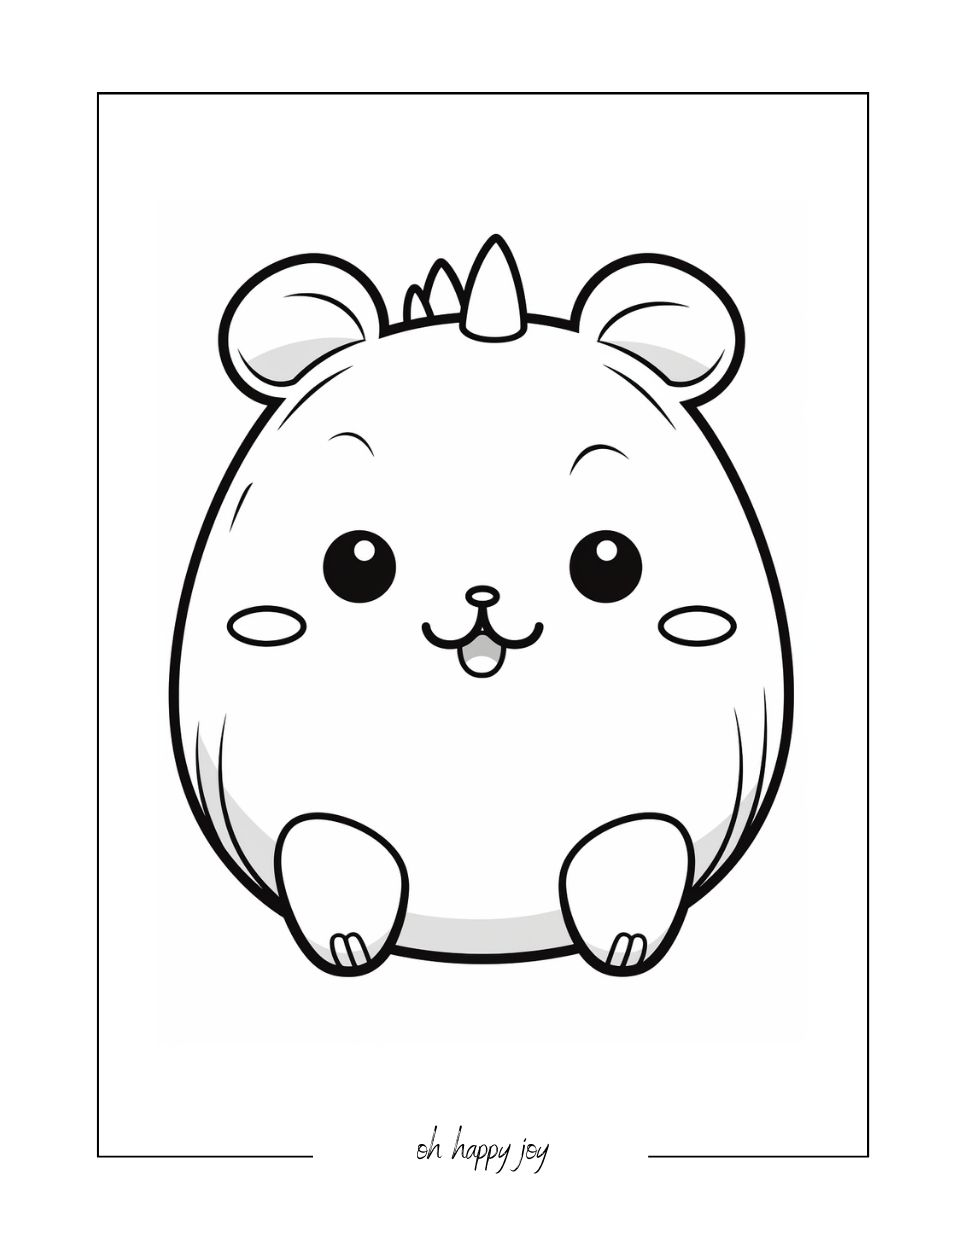 Dragon squishmallow coloring page